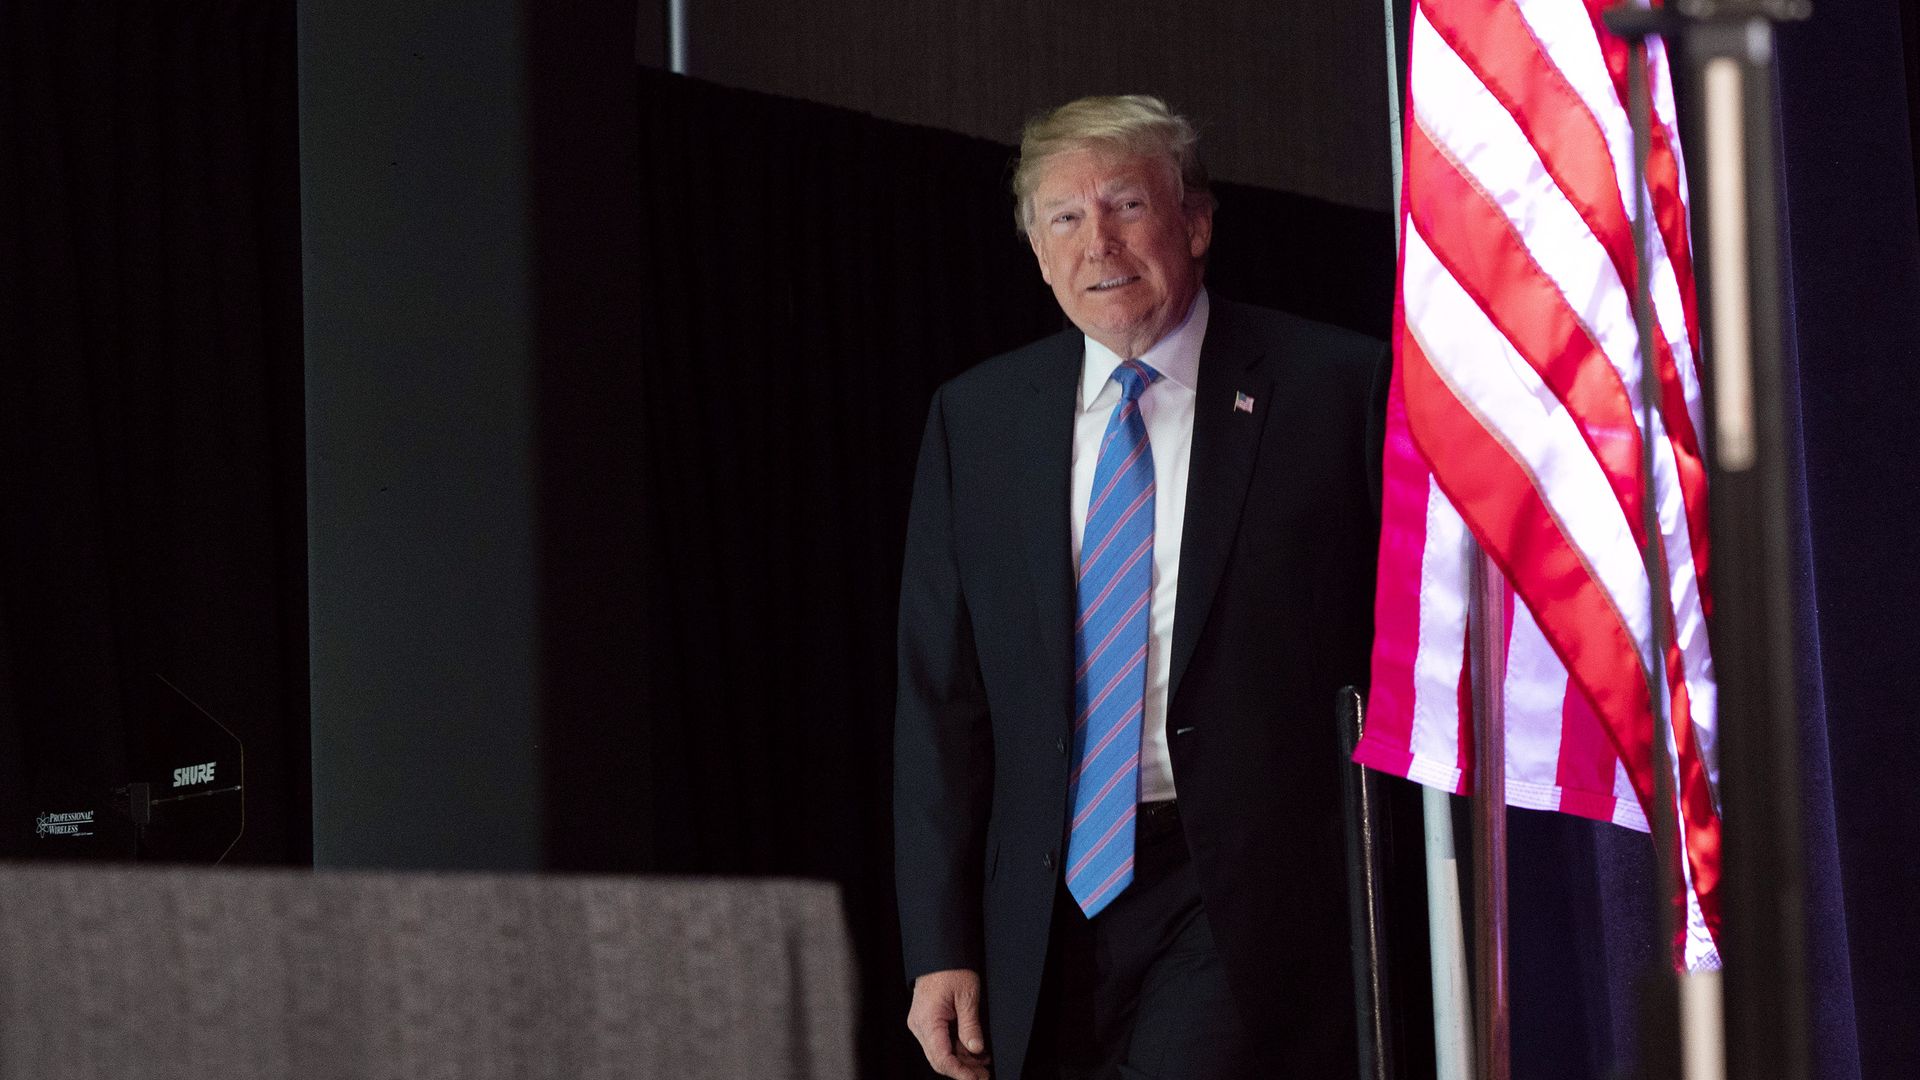 Donald Trump walking on stage peering from behind an American Flag